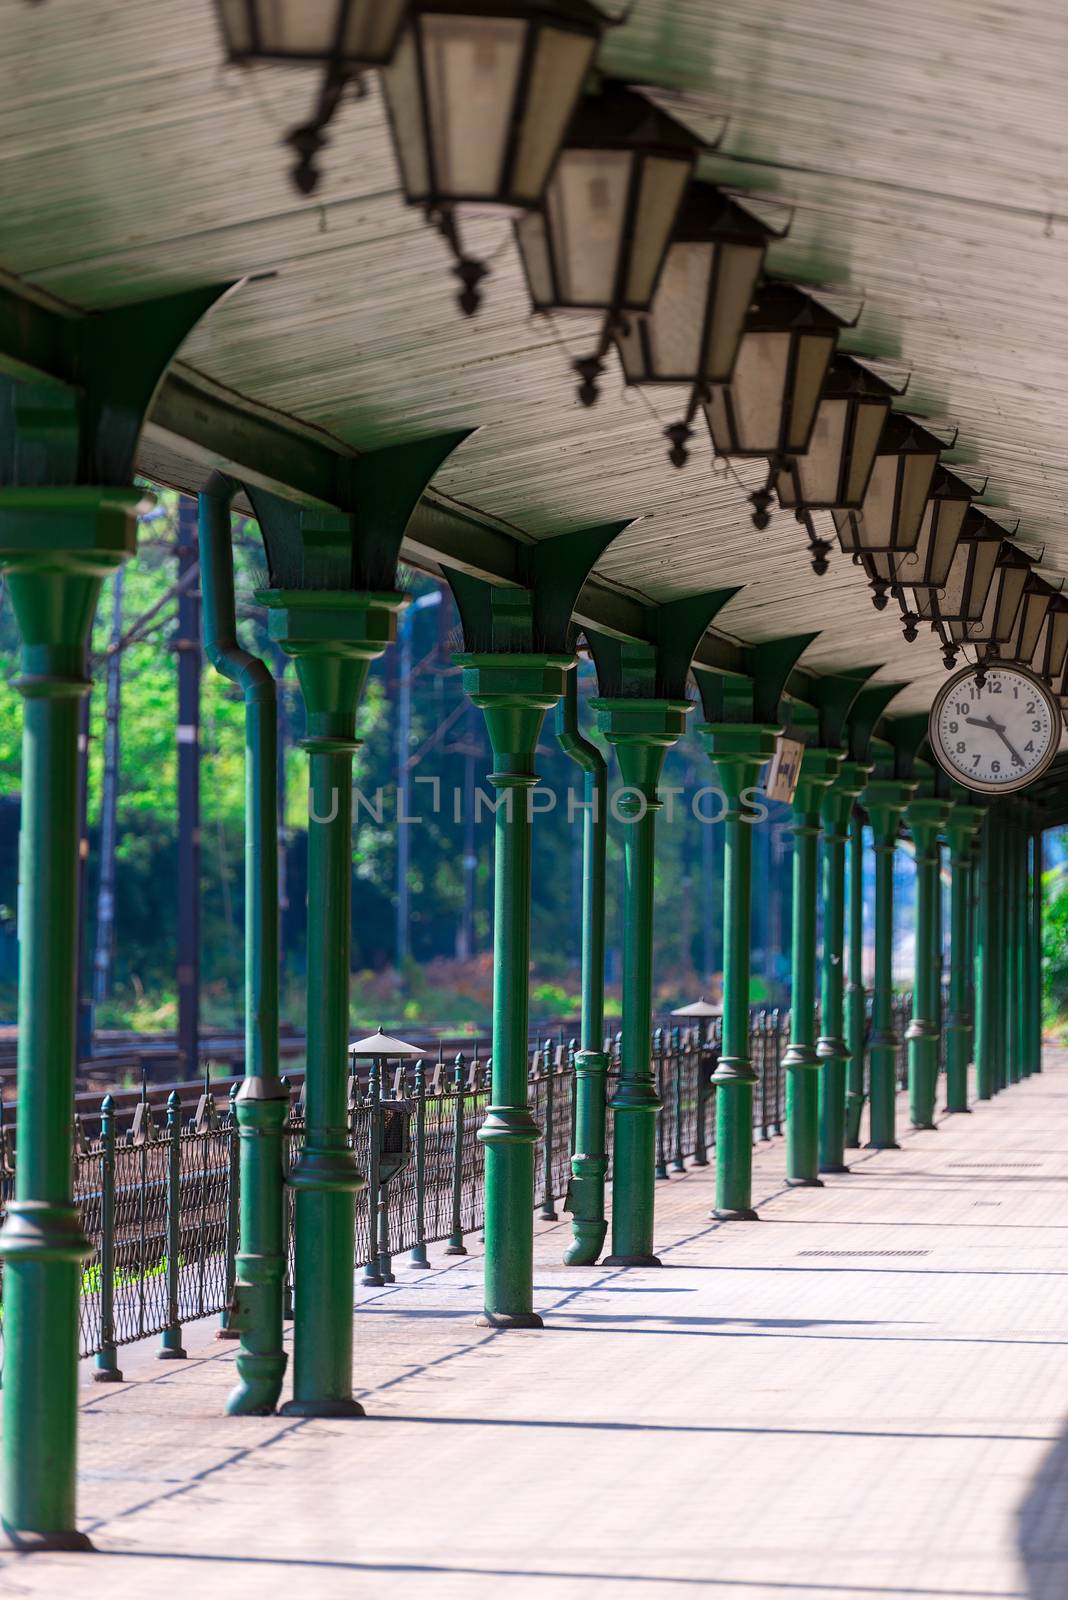 empty station platform in retro style with round clock by kosmsos111